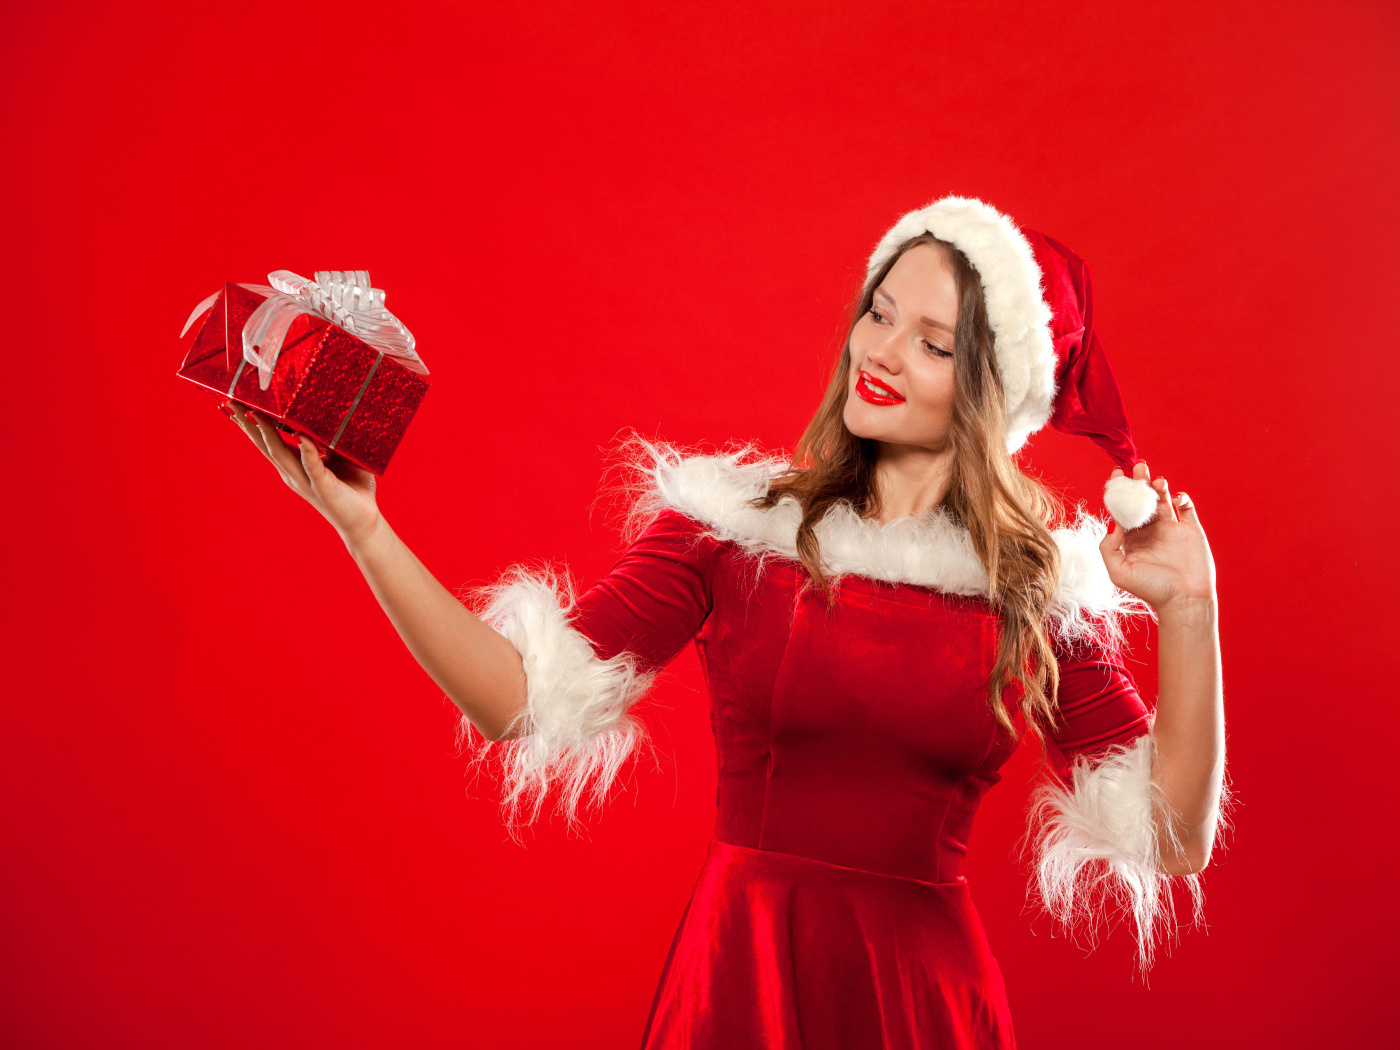 Beautiful Snow Maiden with a gift in her hand on a red background